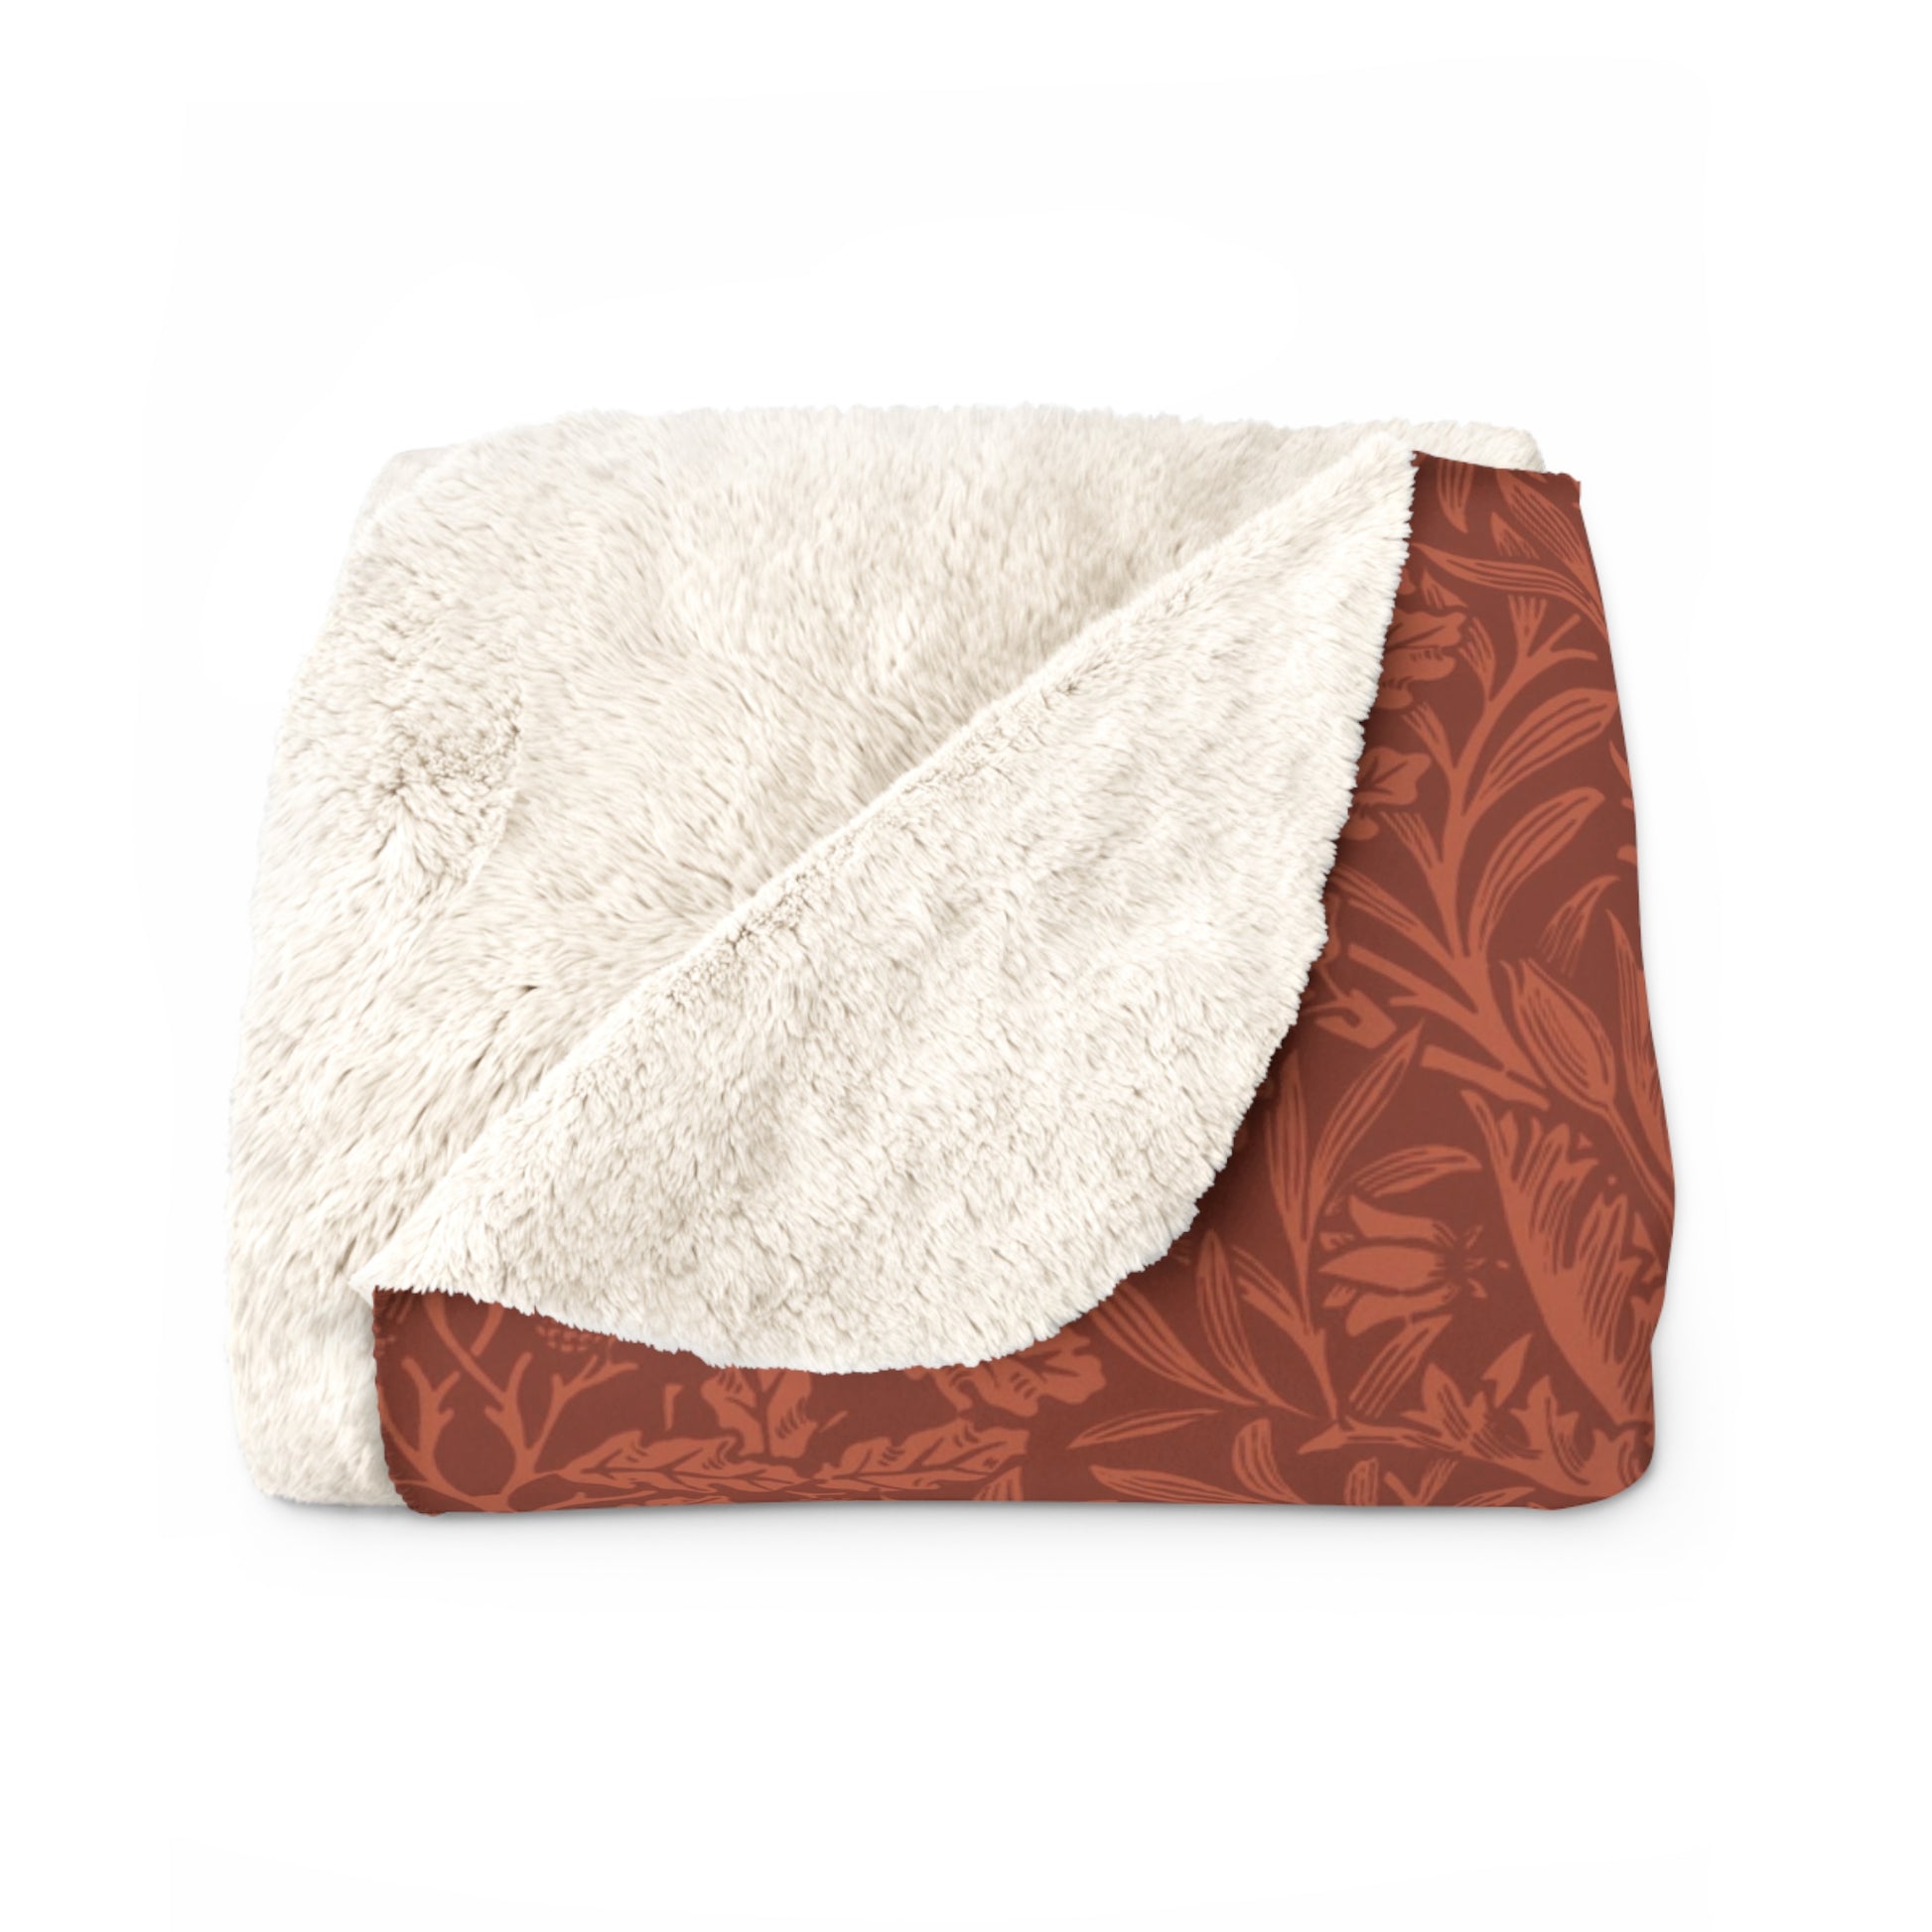 william-morris-co-sherpa-fleece-blanket-acorn-and-oak-leaves-collection-rust-1